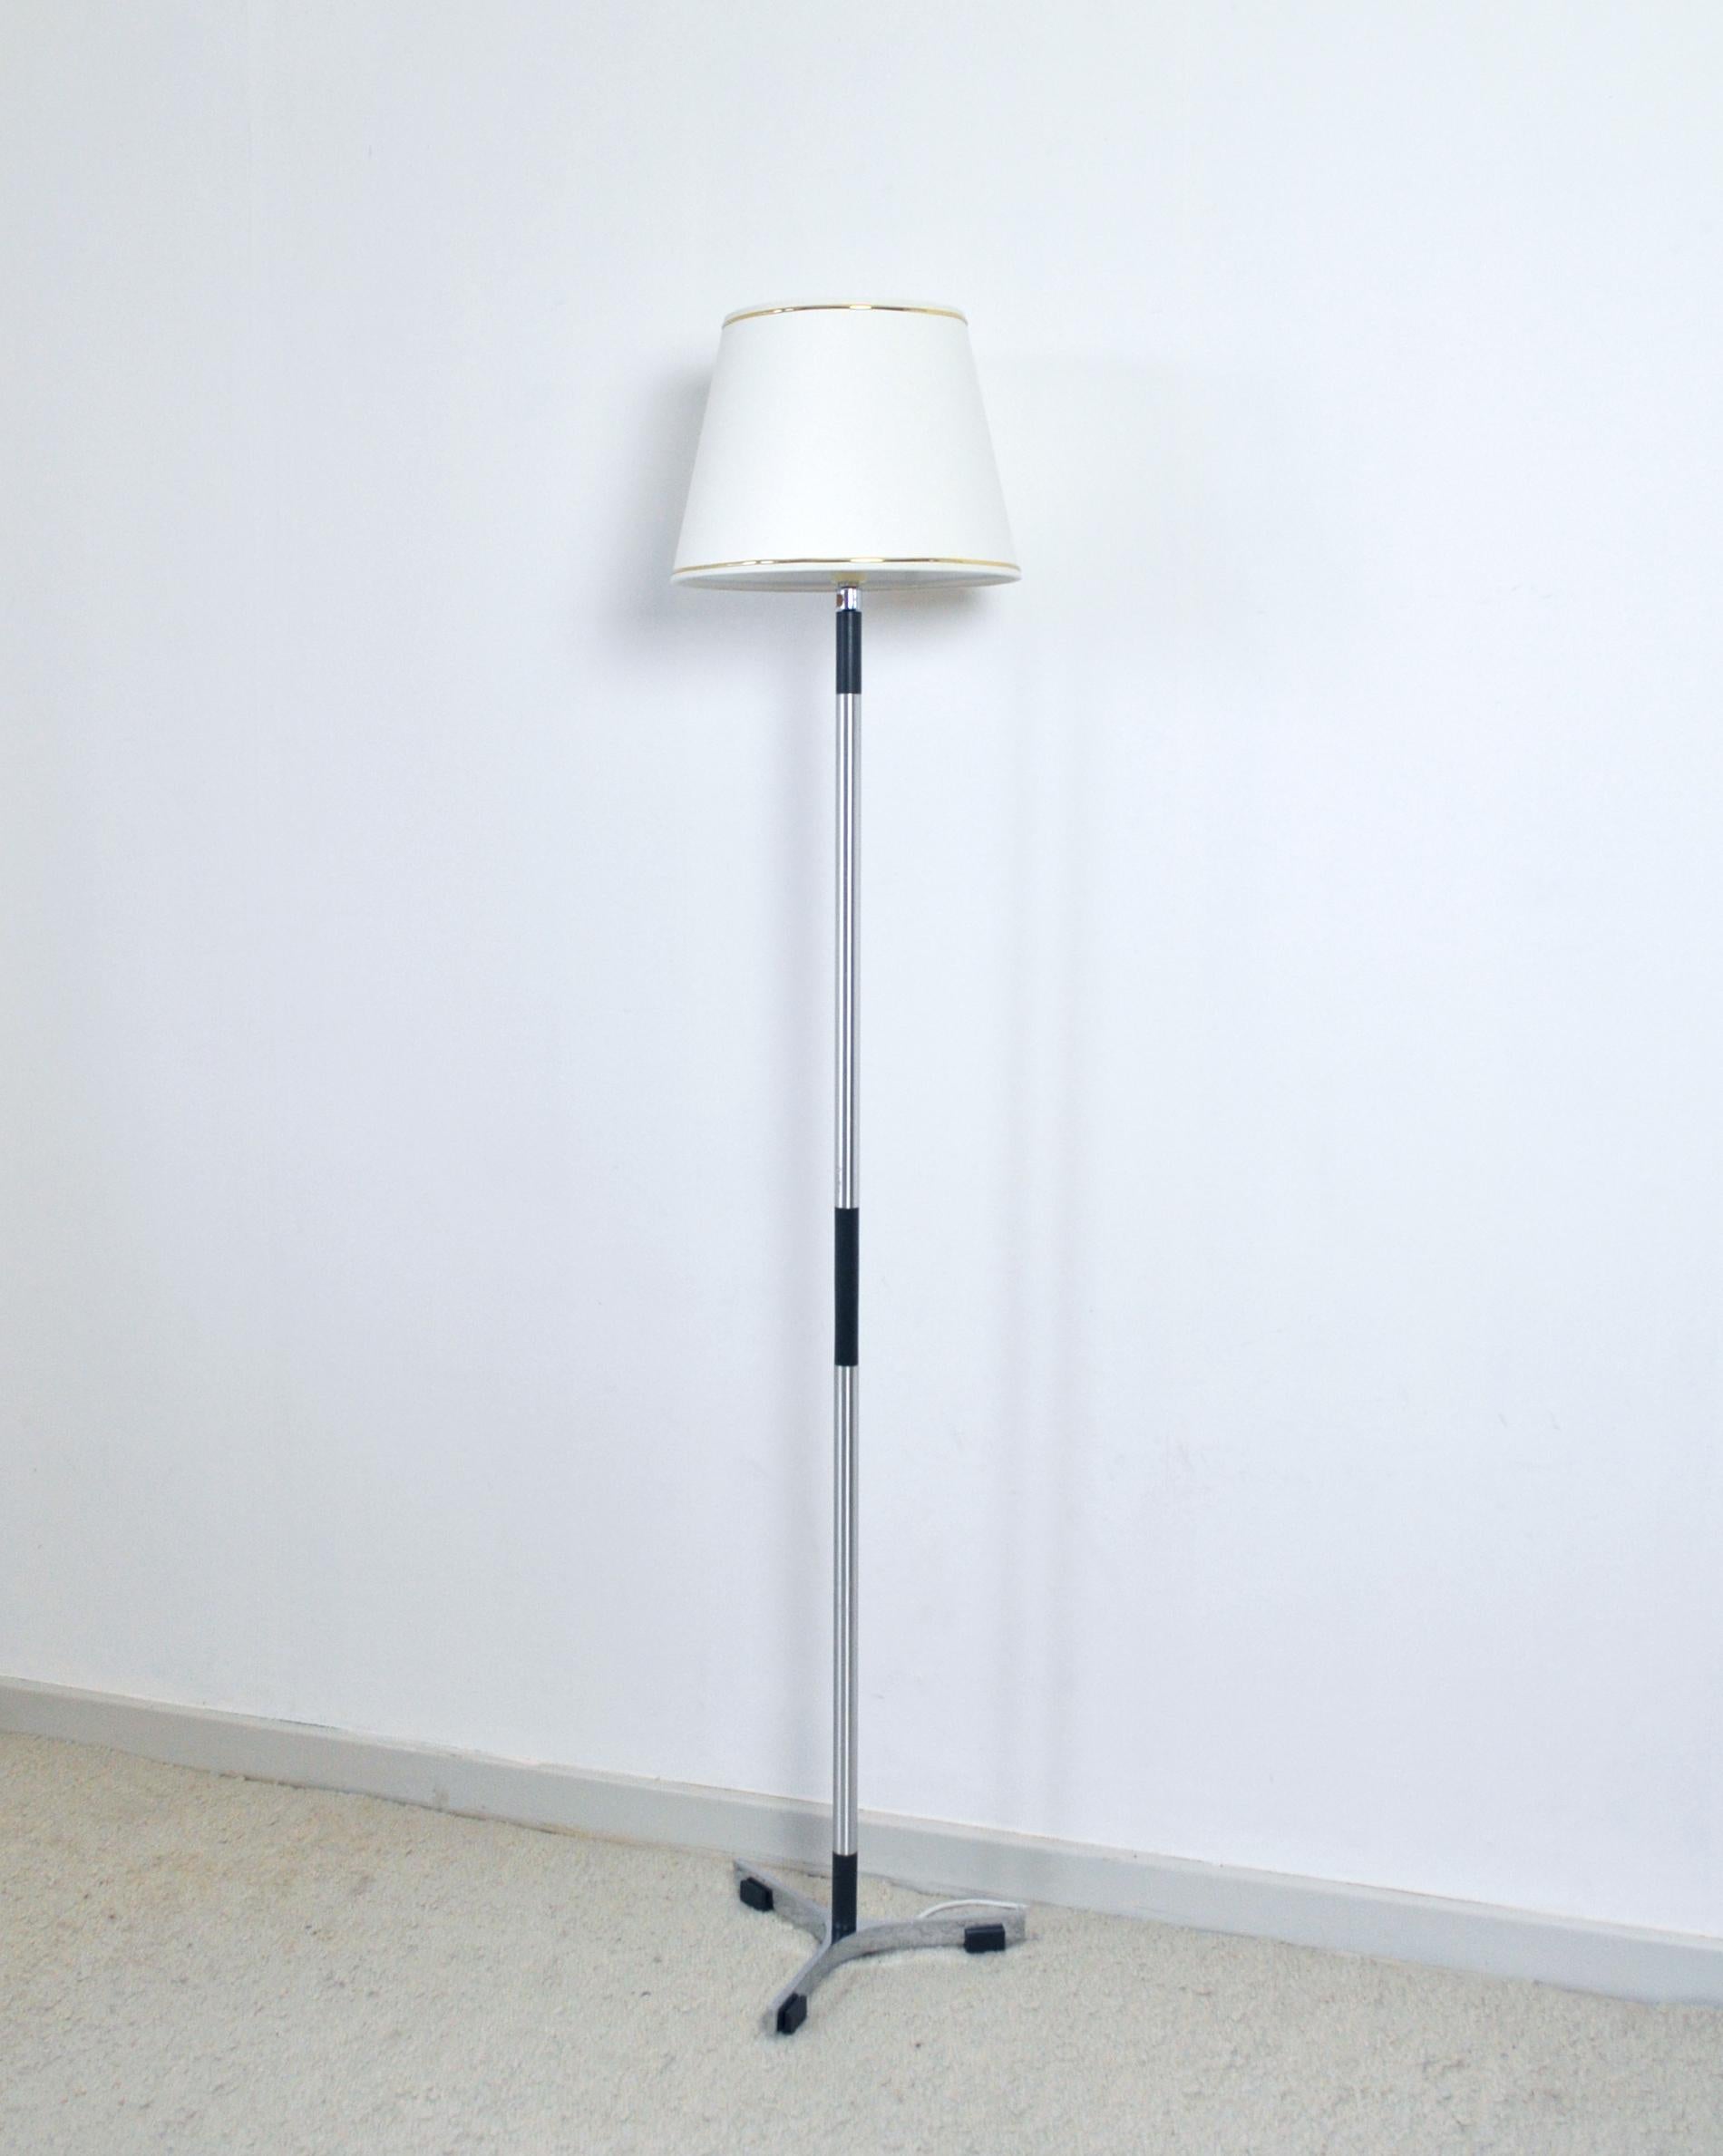 Monolit floor lamp designed by Jo Hammerborg for Fog & Mørup 1960s in Denmark.
Aluminium and blackened wood stem with chromed base.
Fine vintage condition with signs of wear and use. Rewired.
Item comes without shade.